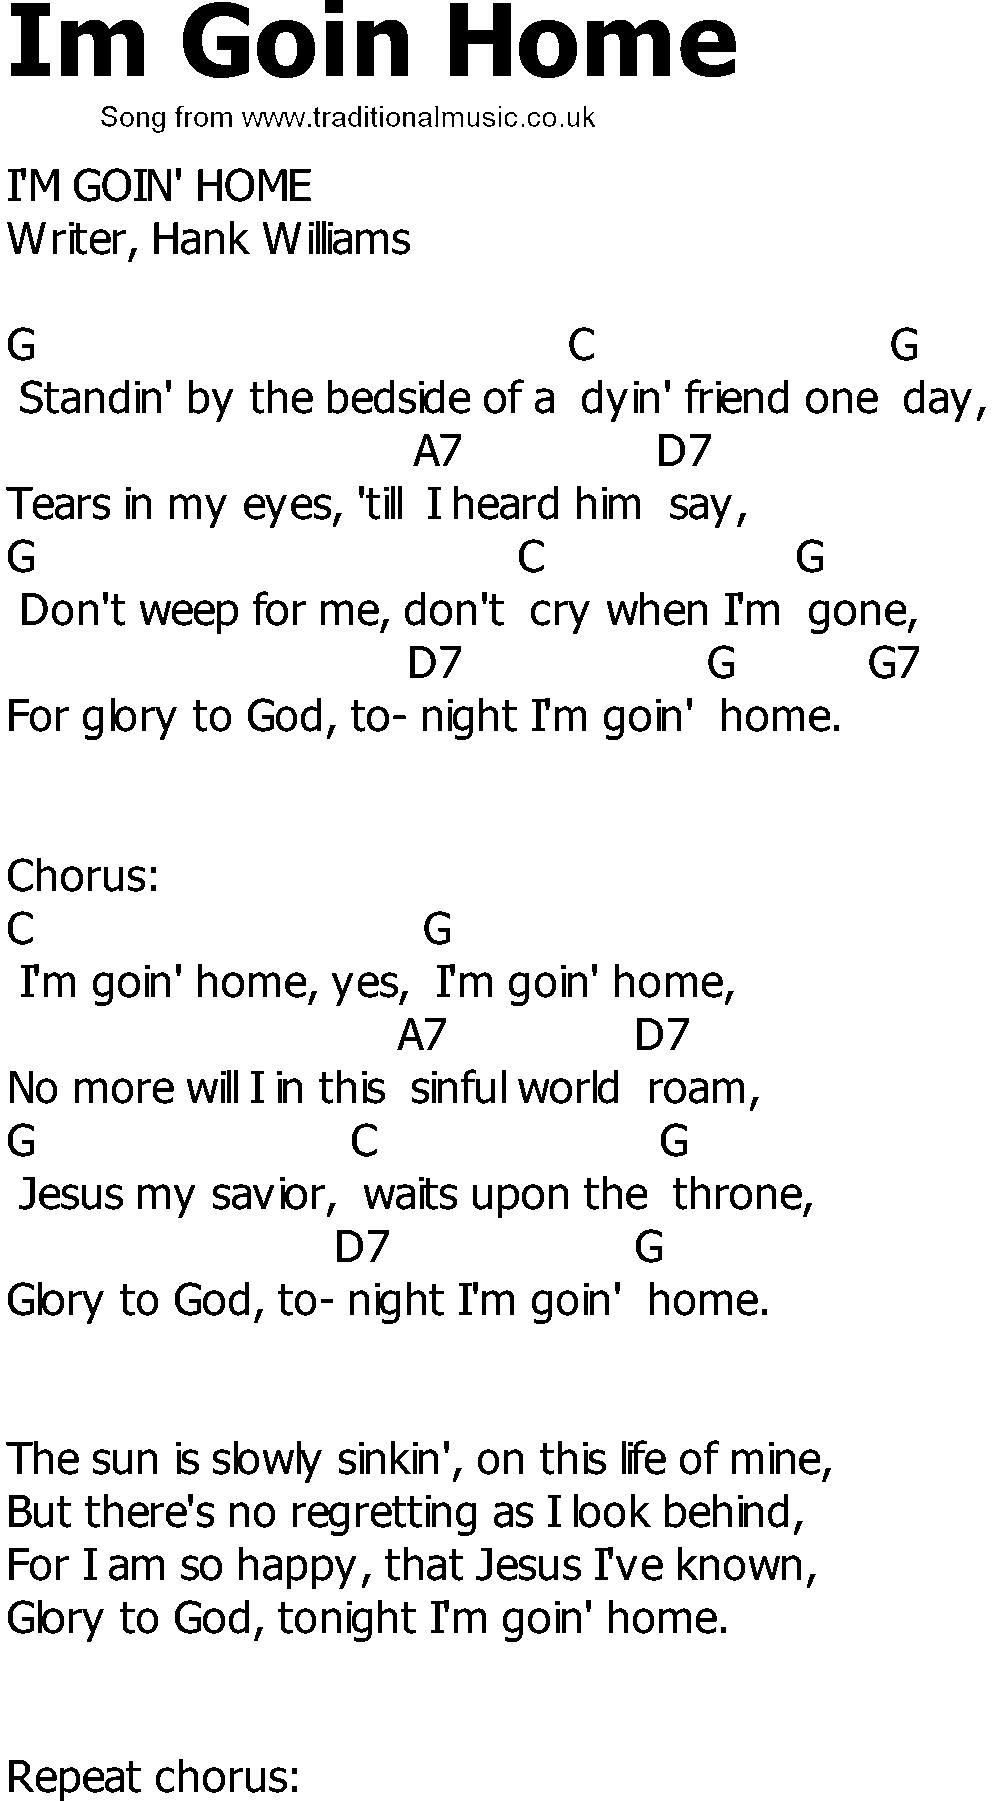 Old Country song lyrics with chords - Im Goin Home